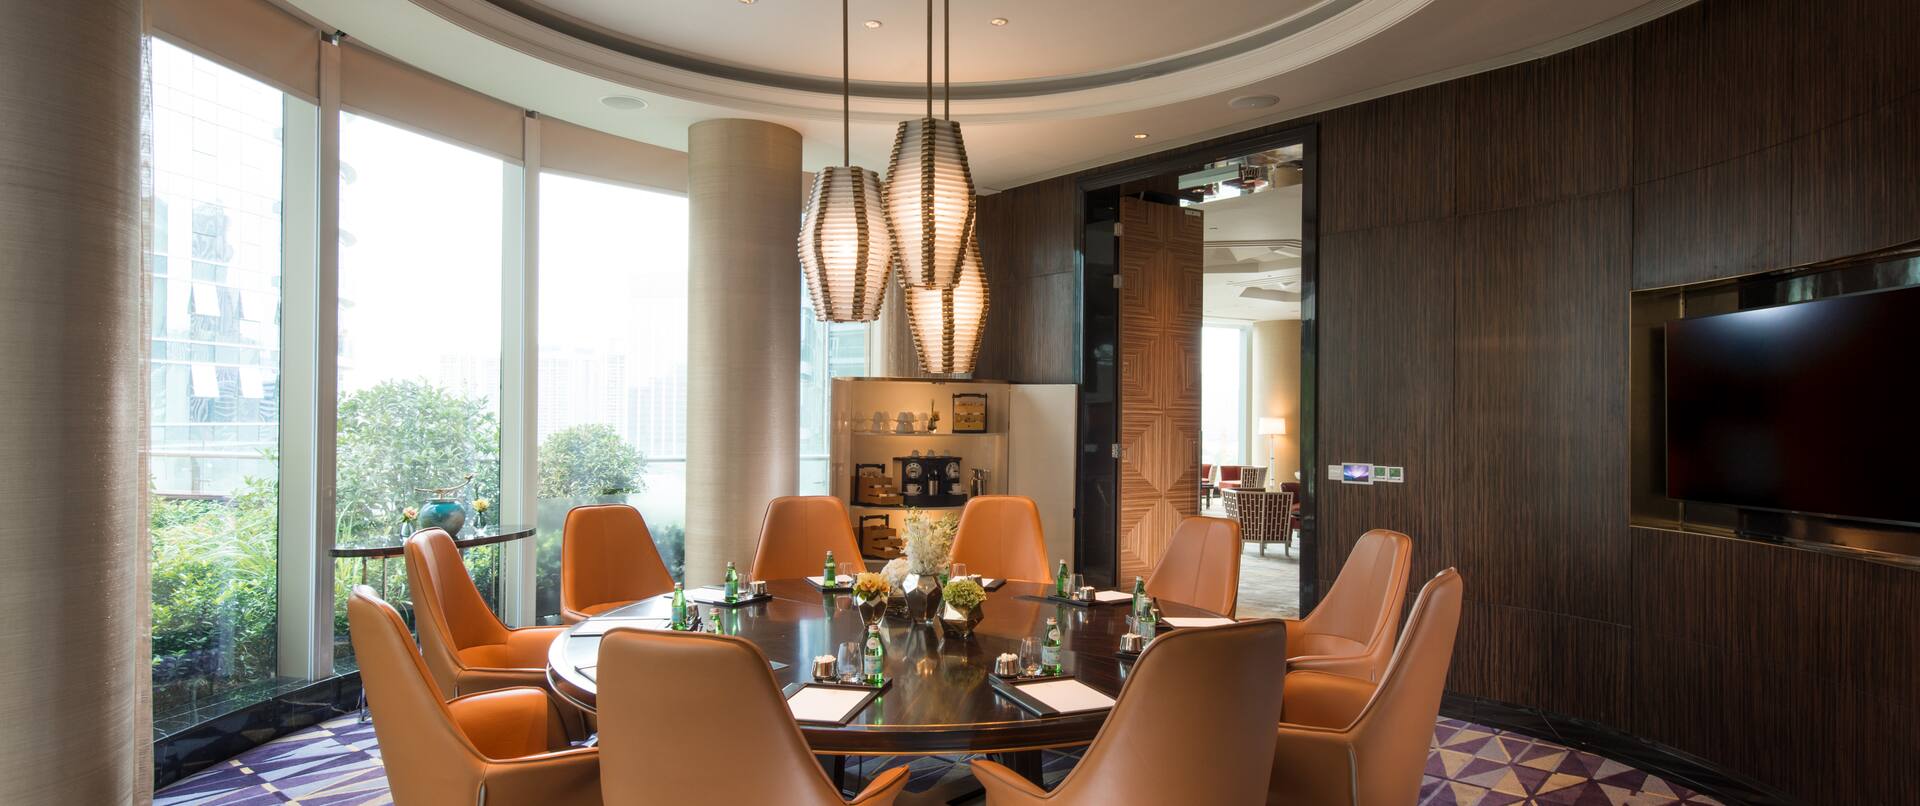 Boardroom with large round table, chairs, TV, and floor-to-ceiling windows with outdoor view